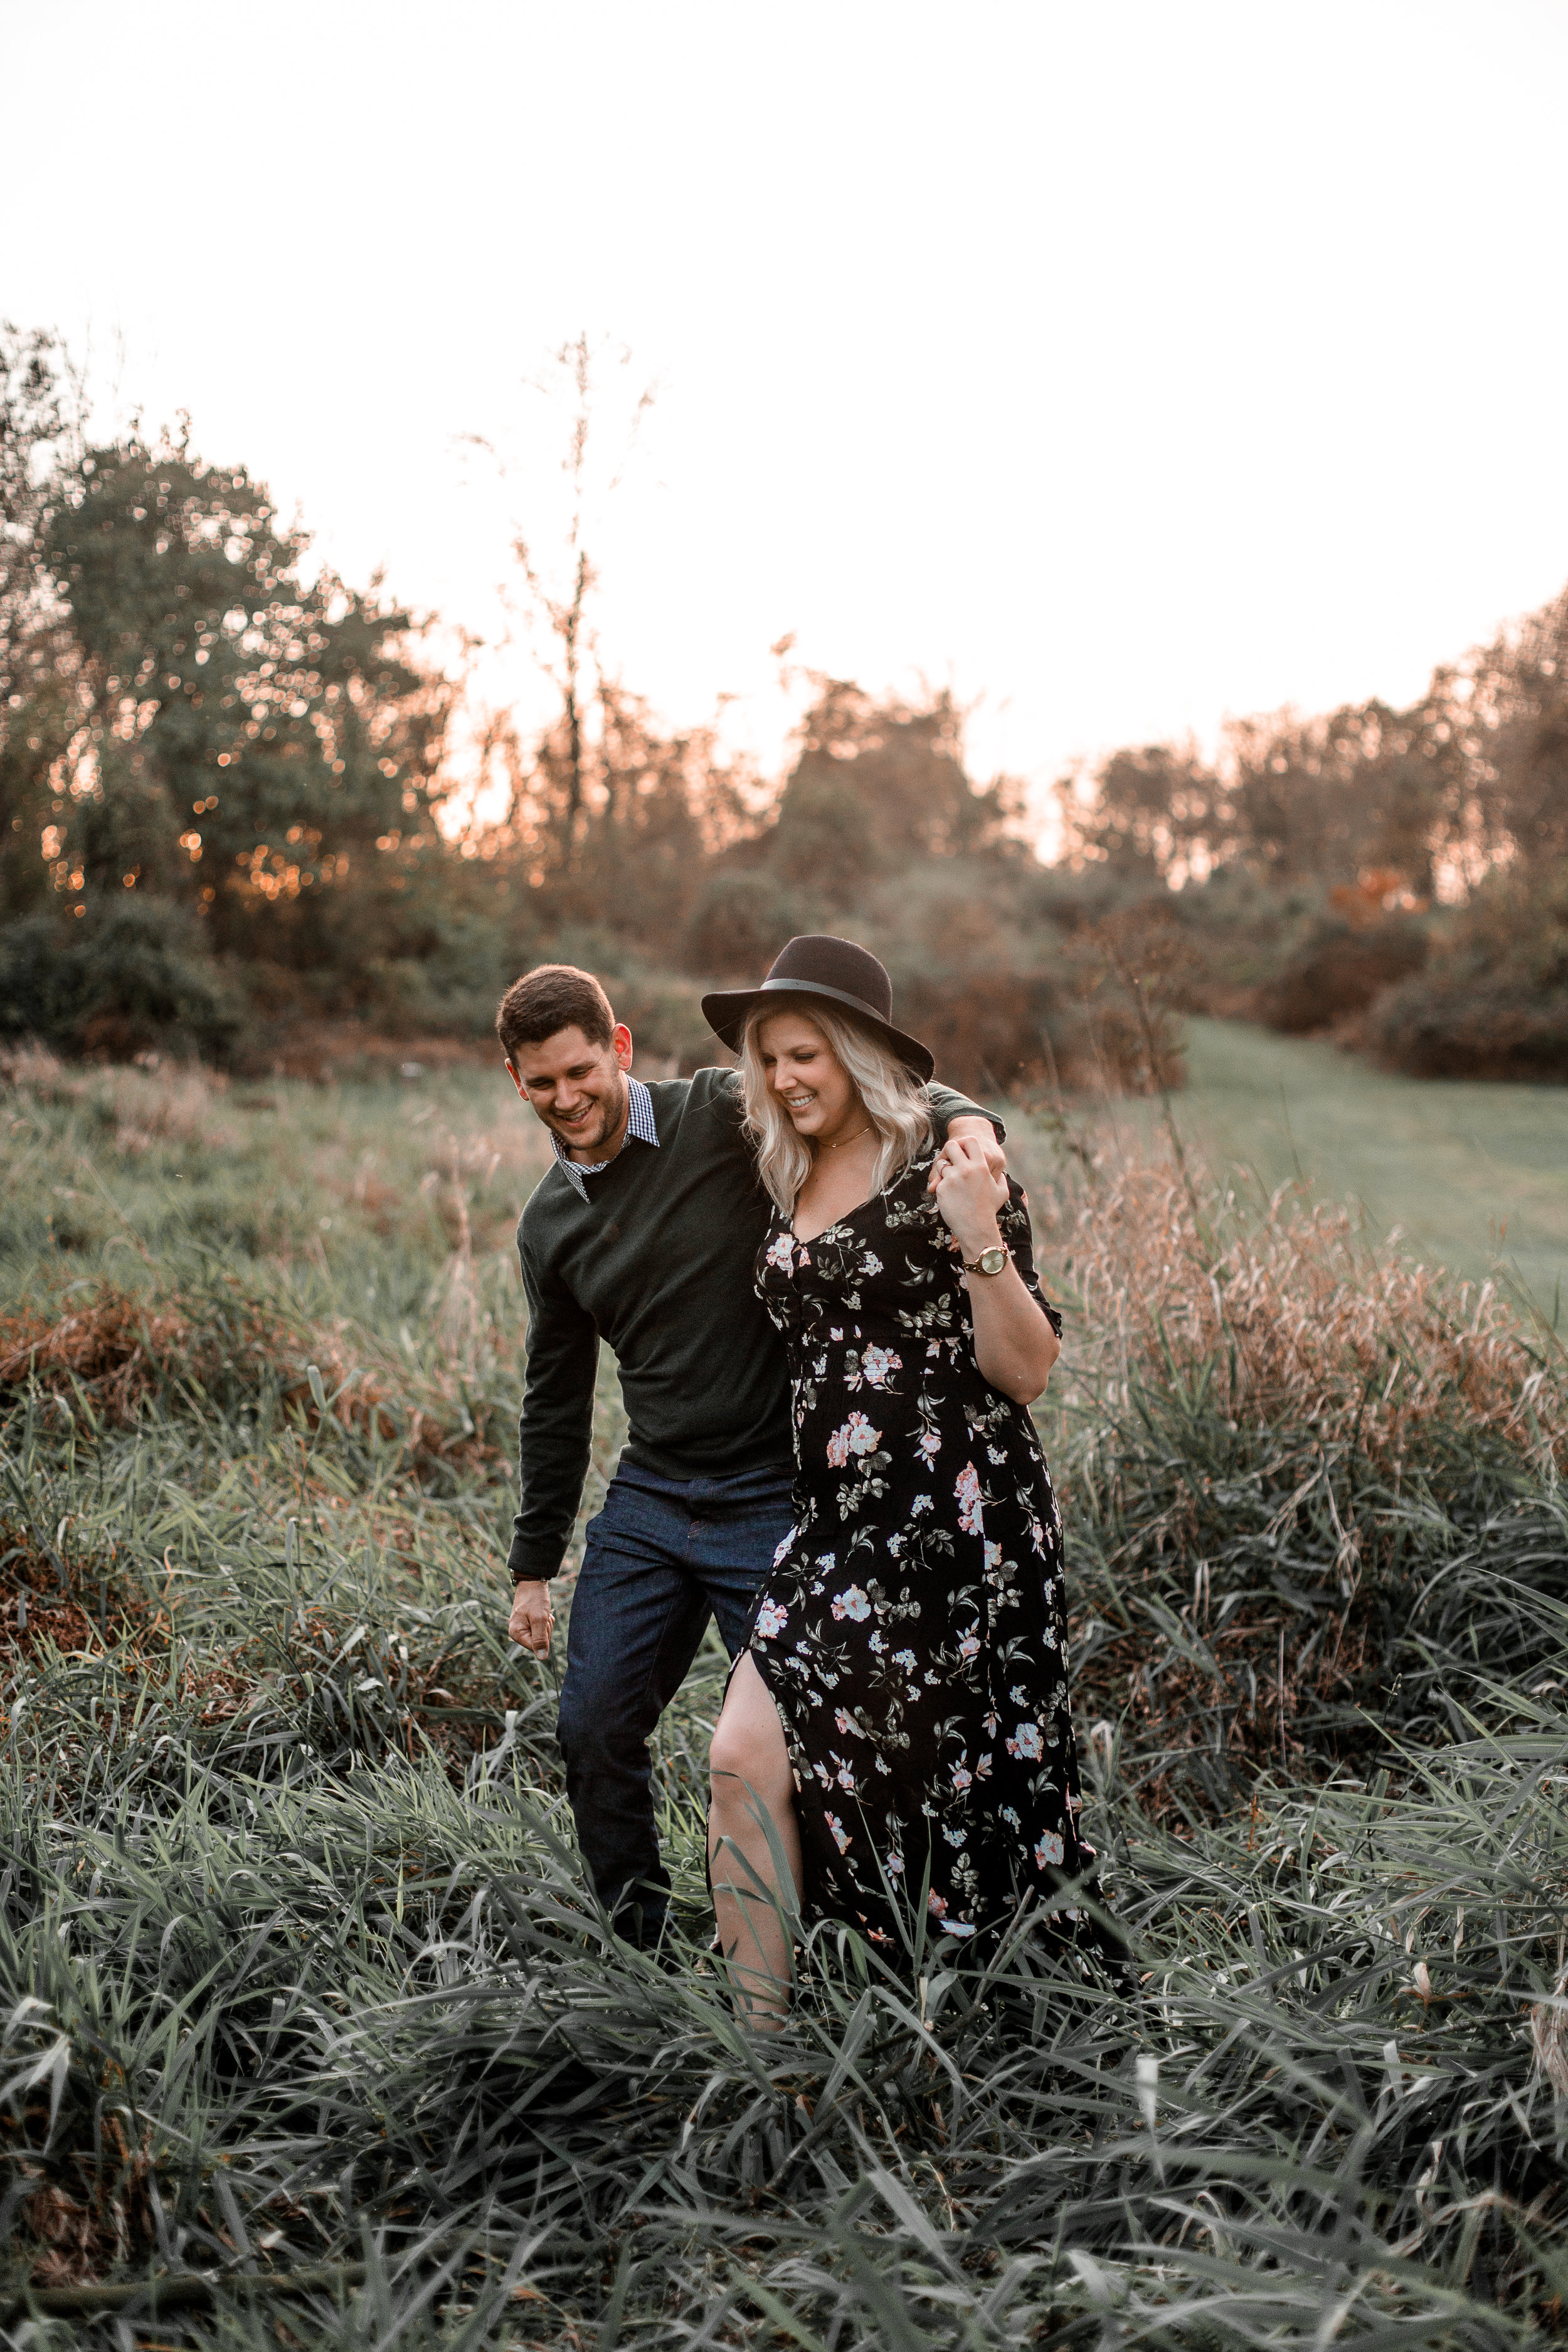 nicole-daacke-photography-carefree-bohemian-lancaster-pa-pennsylvania-engagement-photos-engagement-session-golden-sunset-adventure-session-in-lancaster-pa-lancaster-pa-outdoor-wedding-photographer-27.jpg